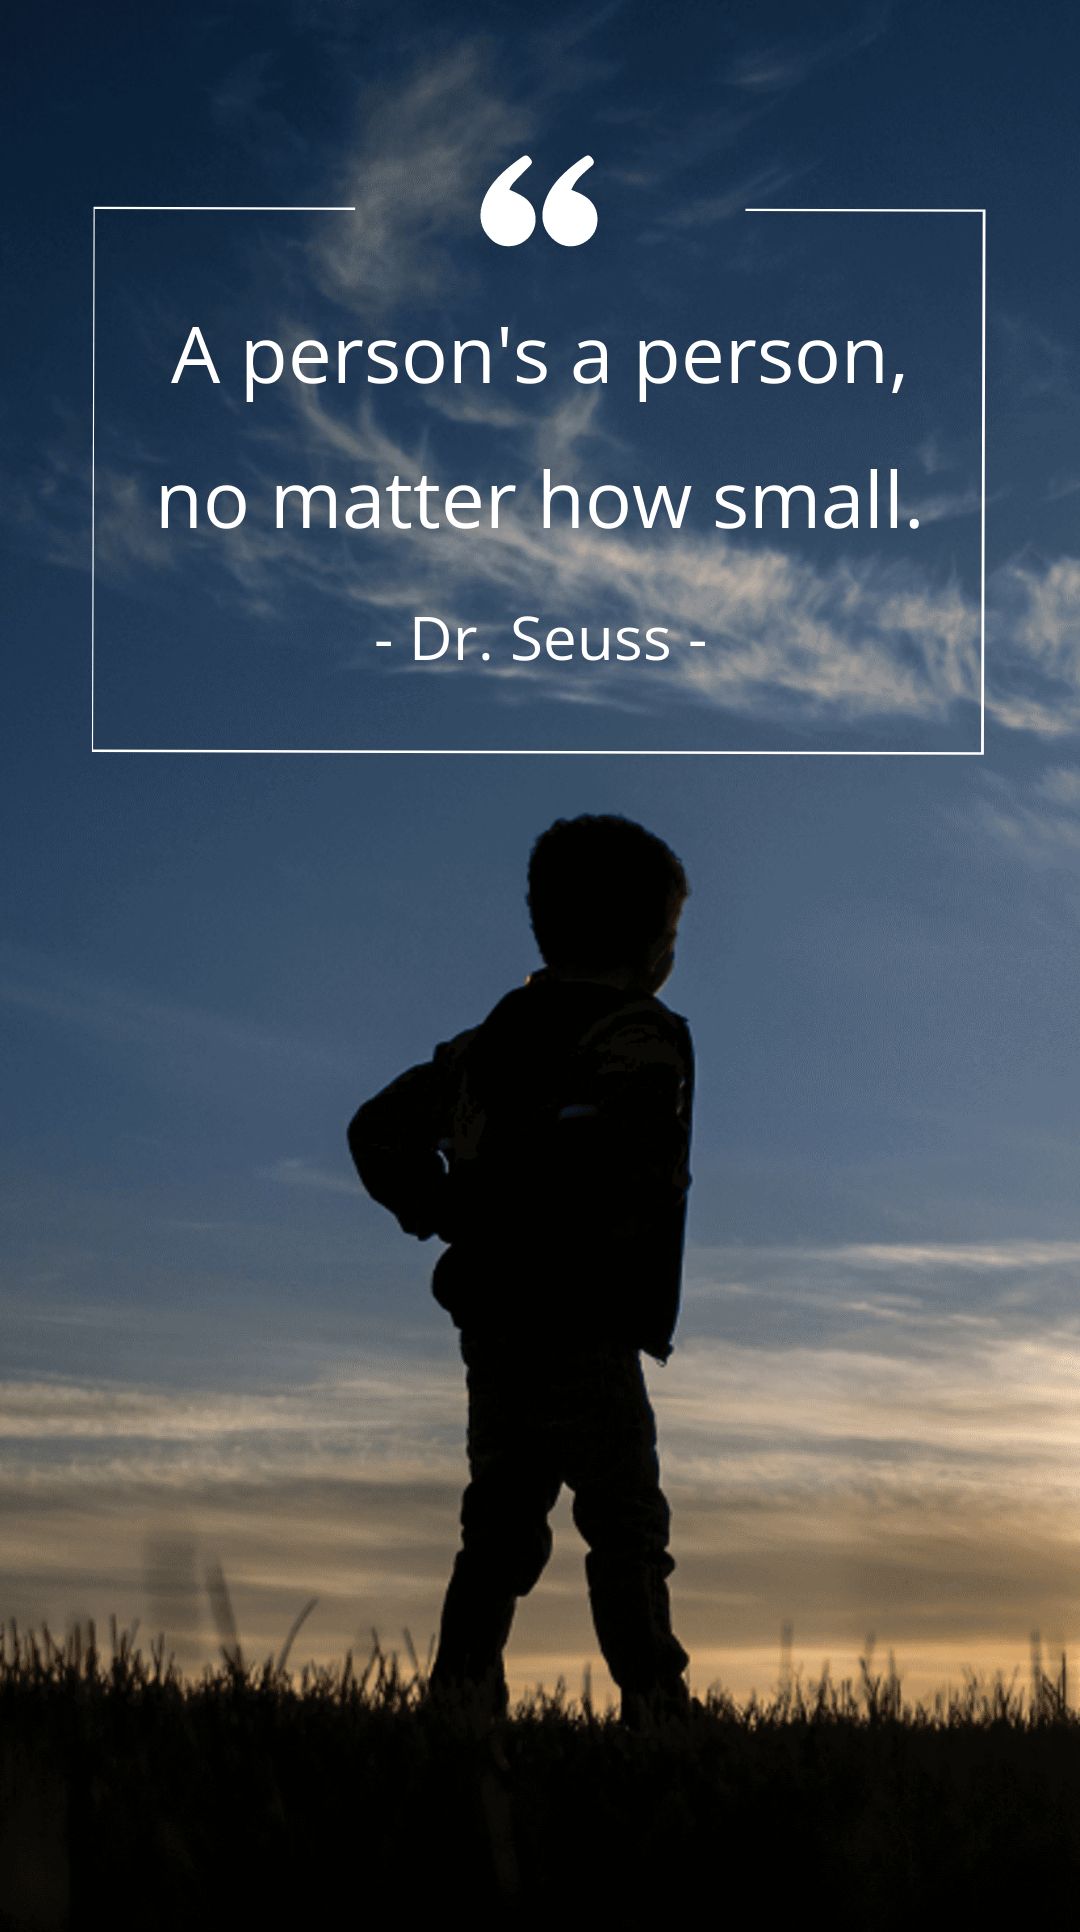 Dr. Seuss - A person's a person, no matter how small.